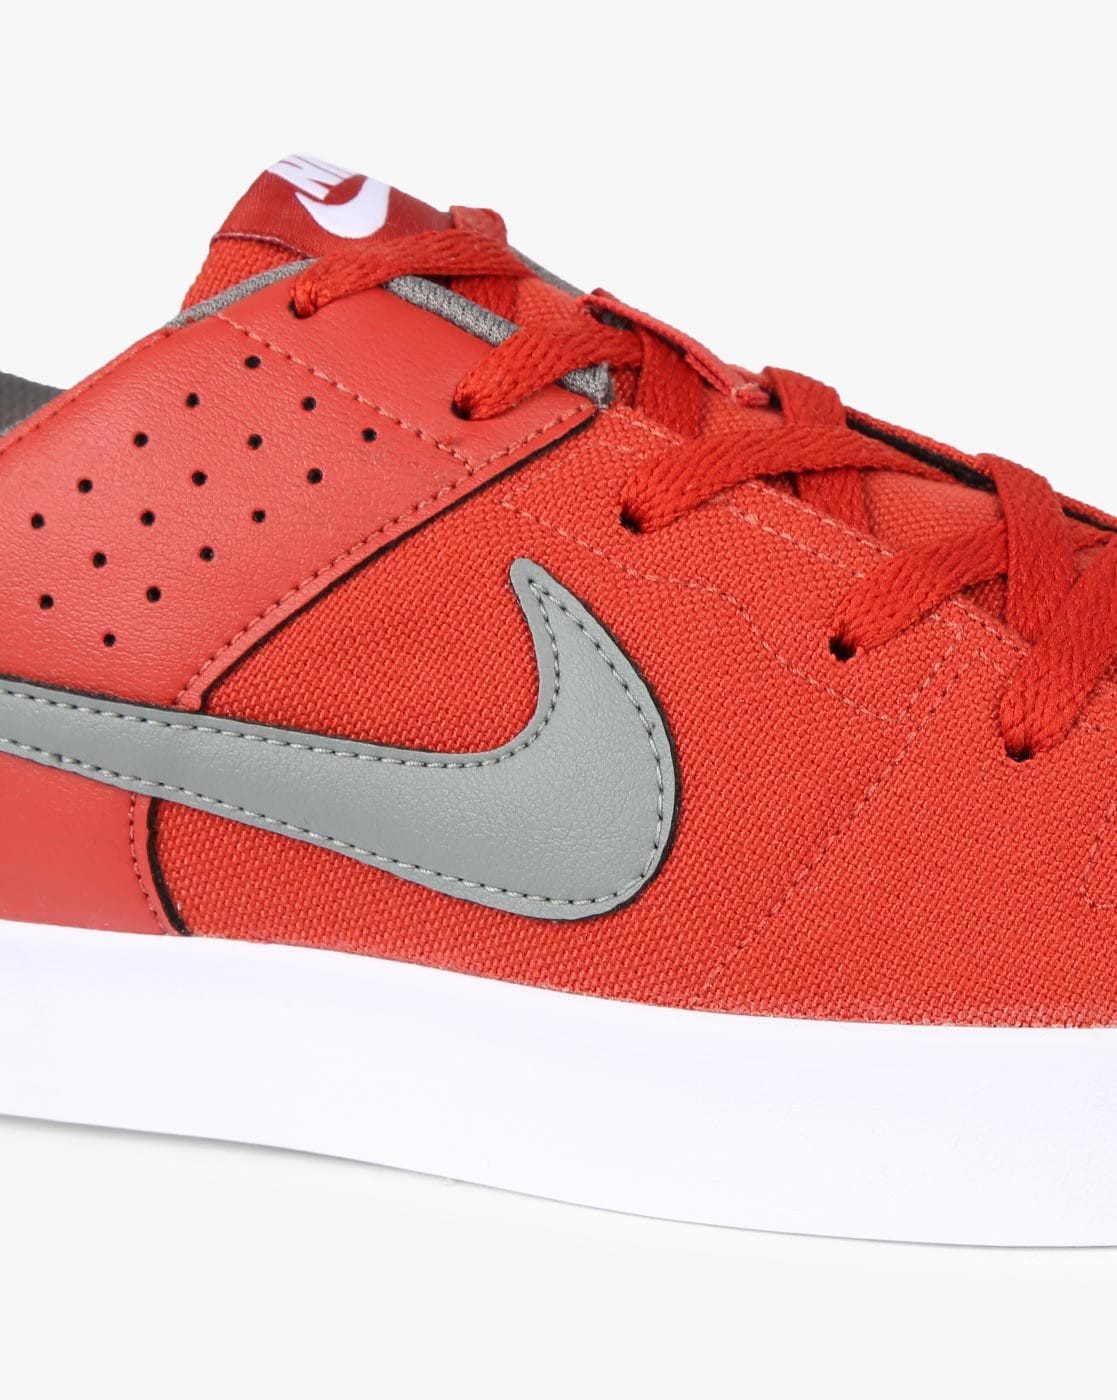 Buy Nike Men's Liteforce III Mid Wolf Grey,Unvrsty Red-Wht Casual Sneakers  Online at Low Prices in India - Paytmmall.com